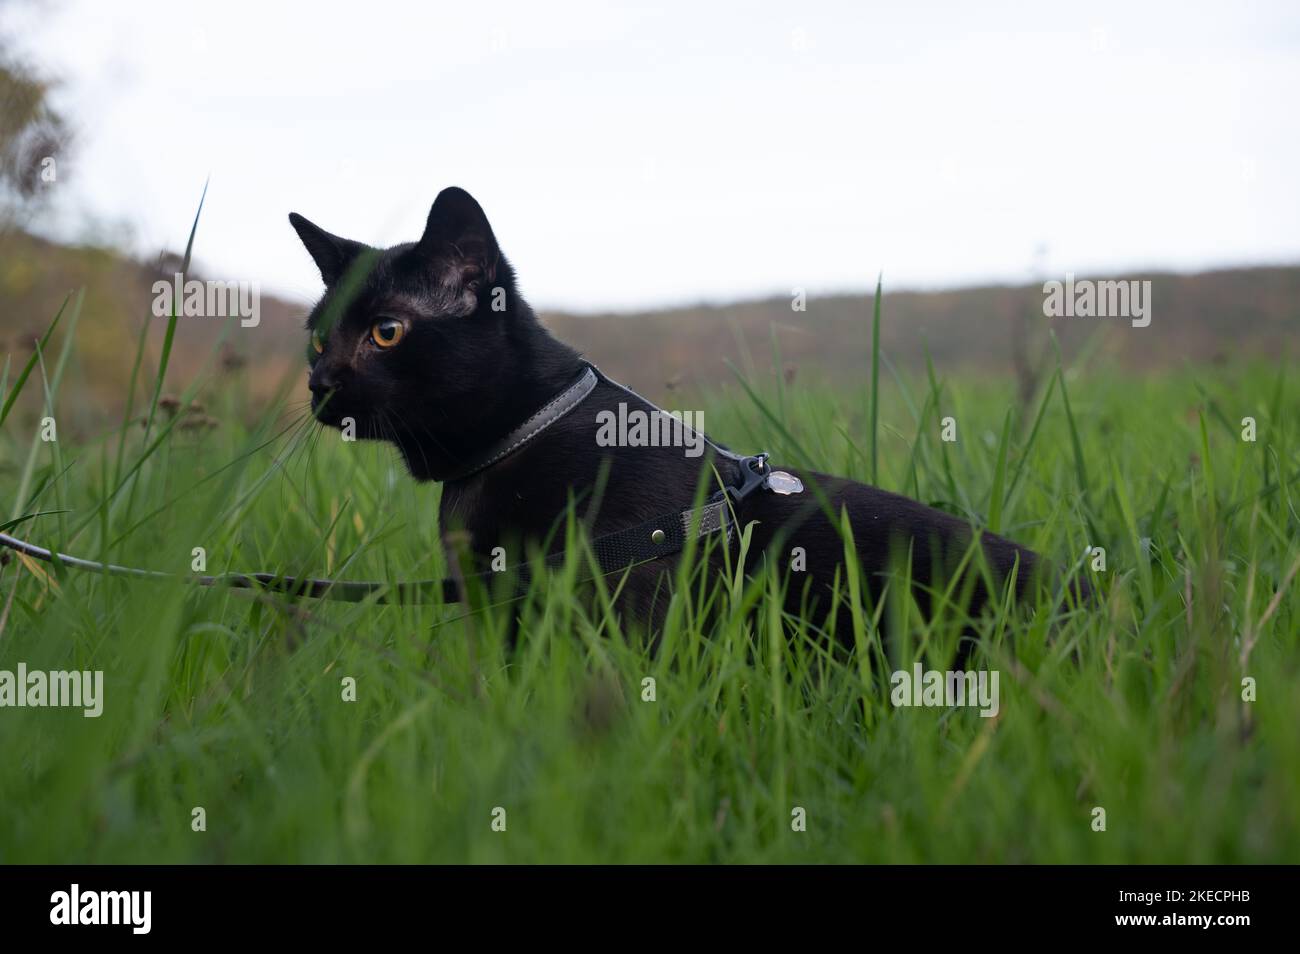 Black cat on a leash sits in the green grass on a meadow Stock Photo